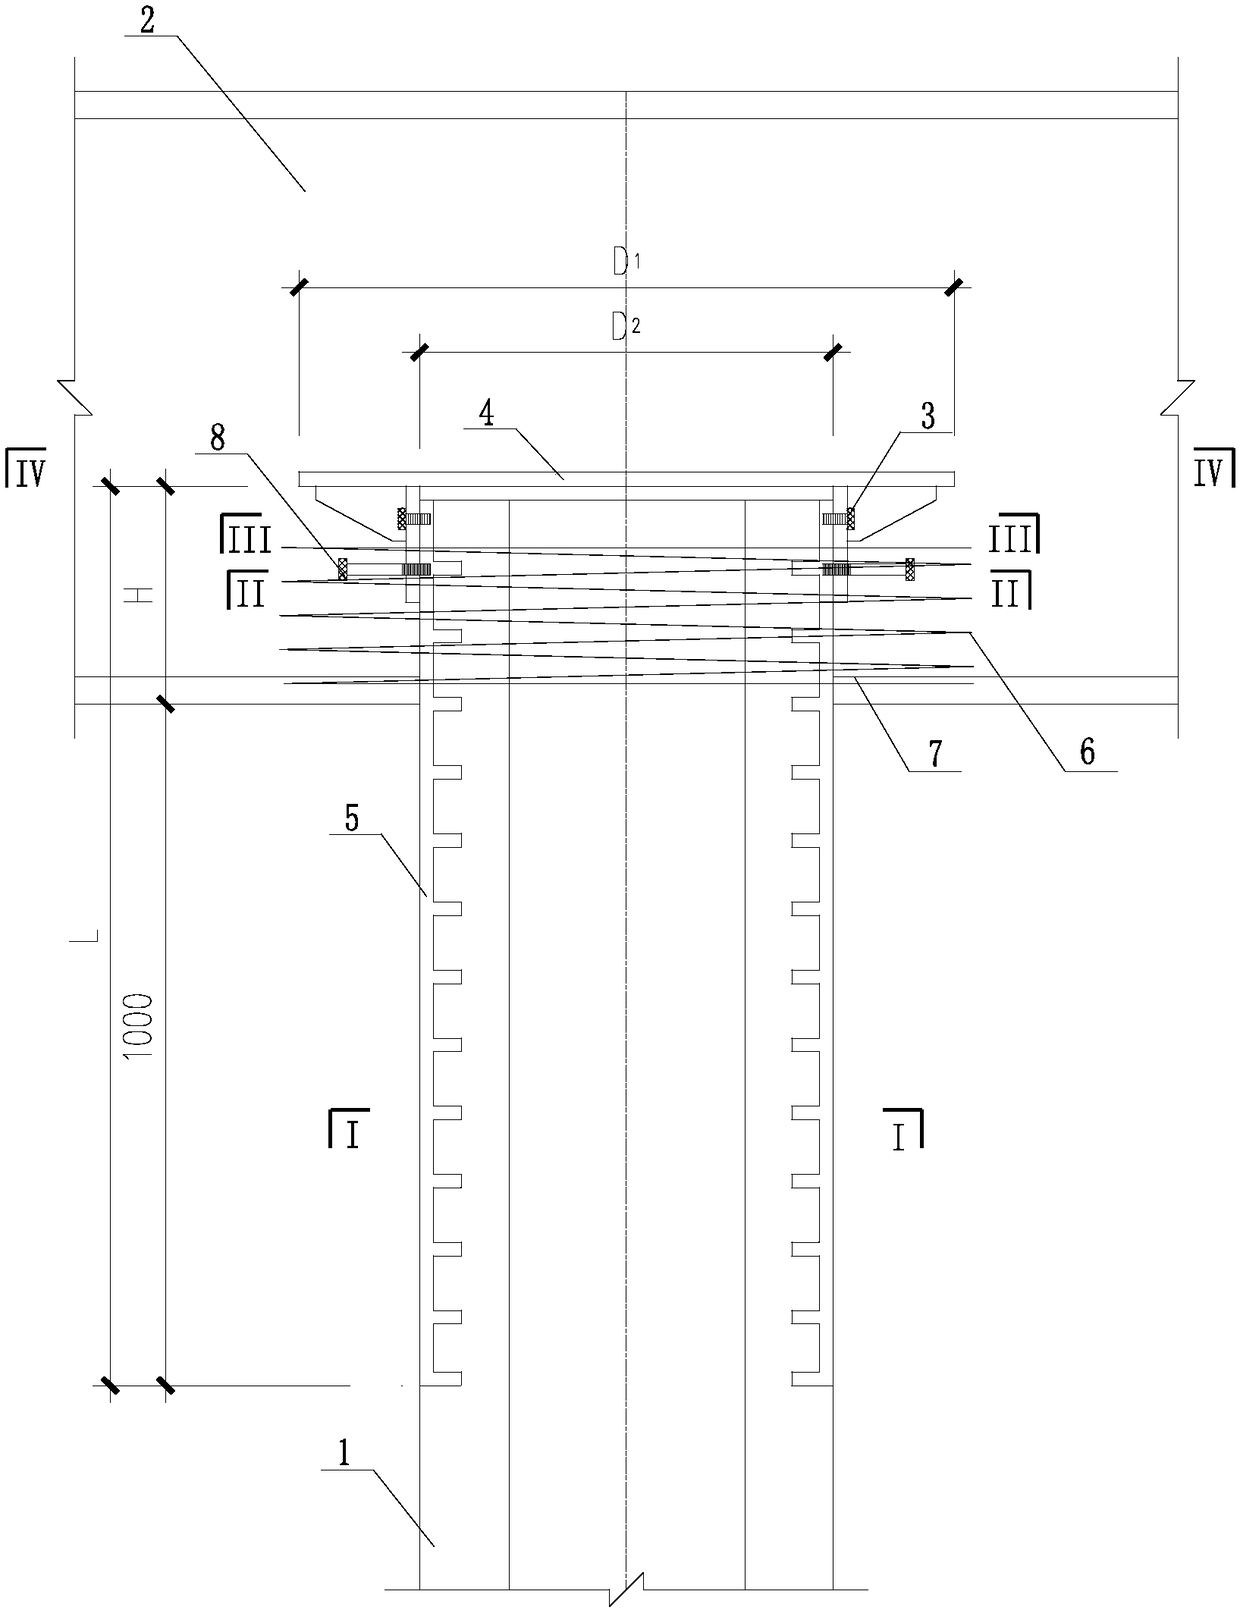 Flange connecting structure for foundation base piles of overhead transmission line PHC pipe piles and bearing platform